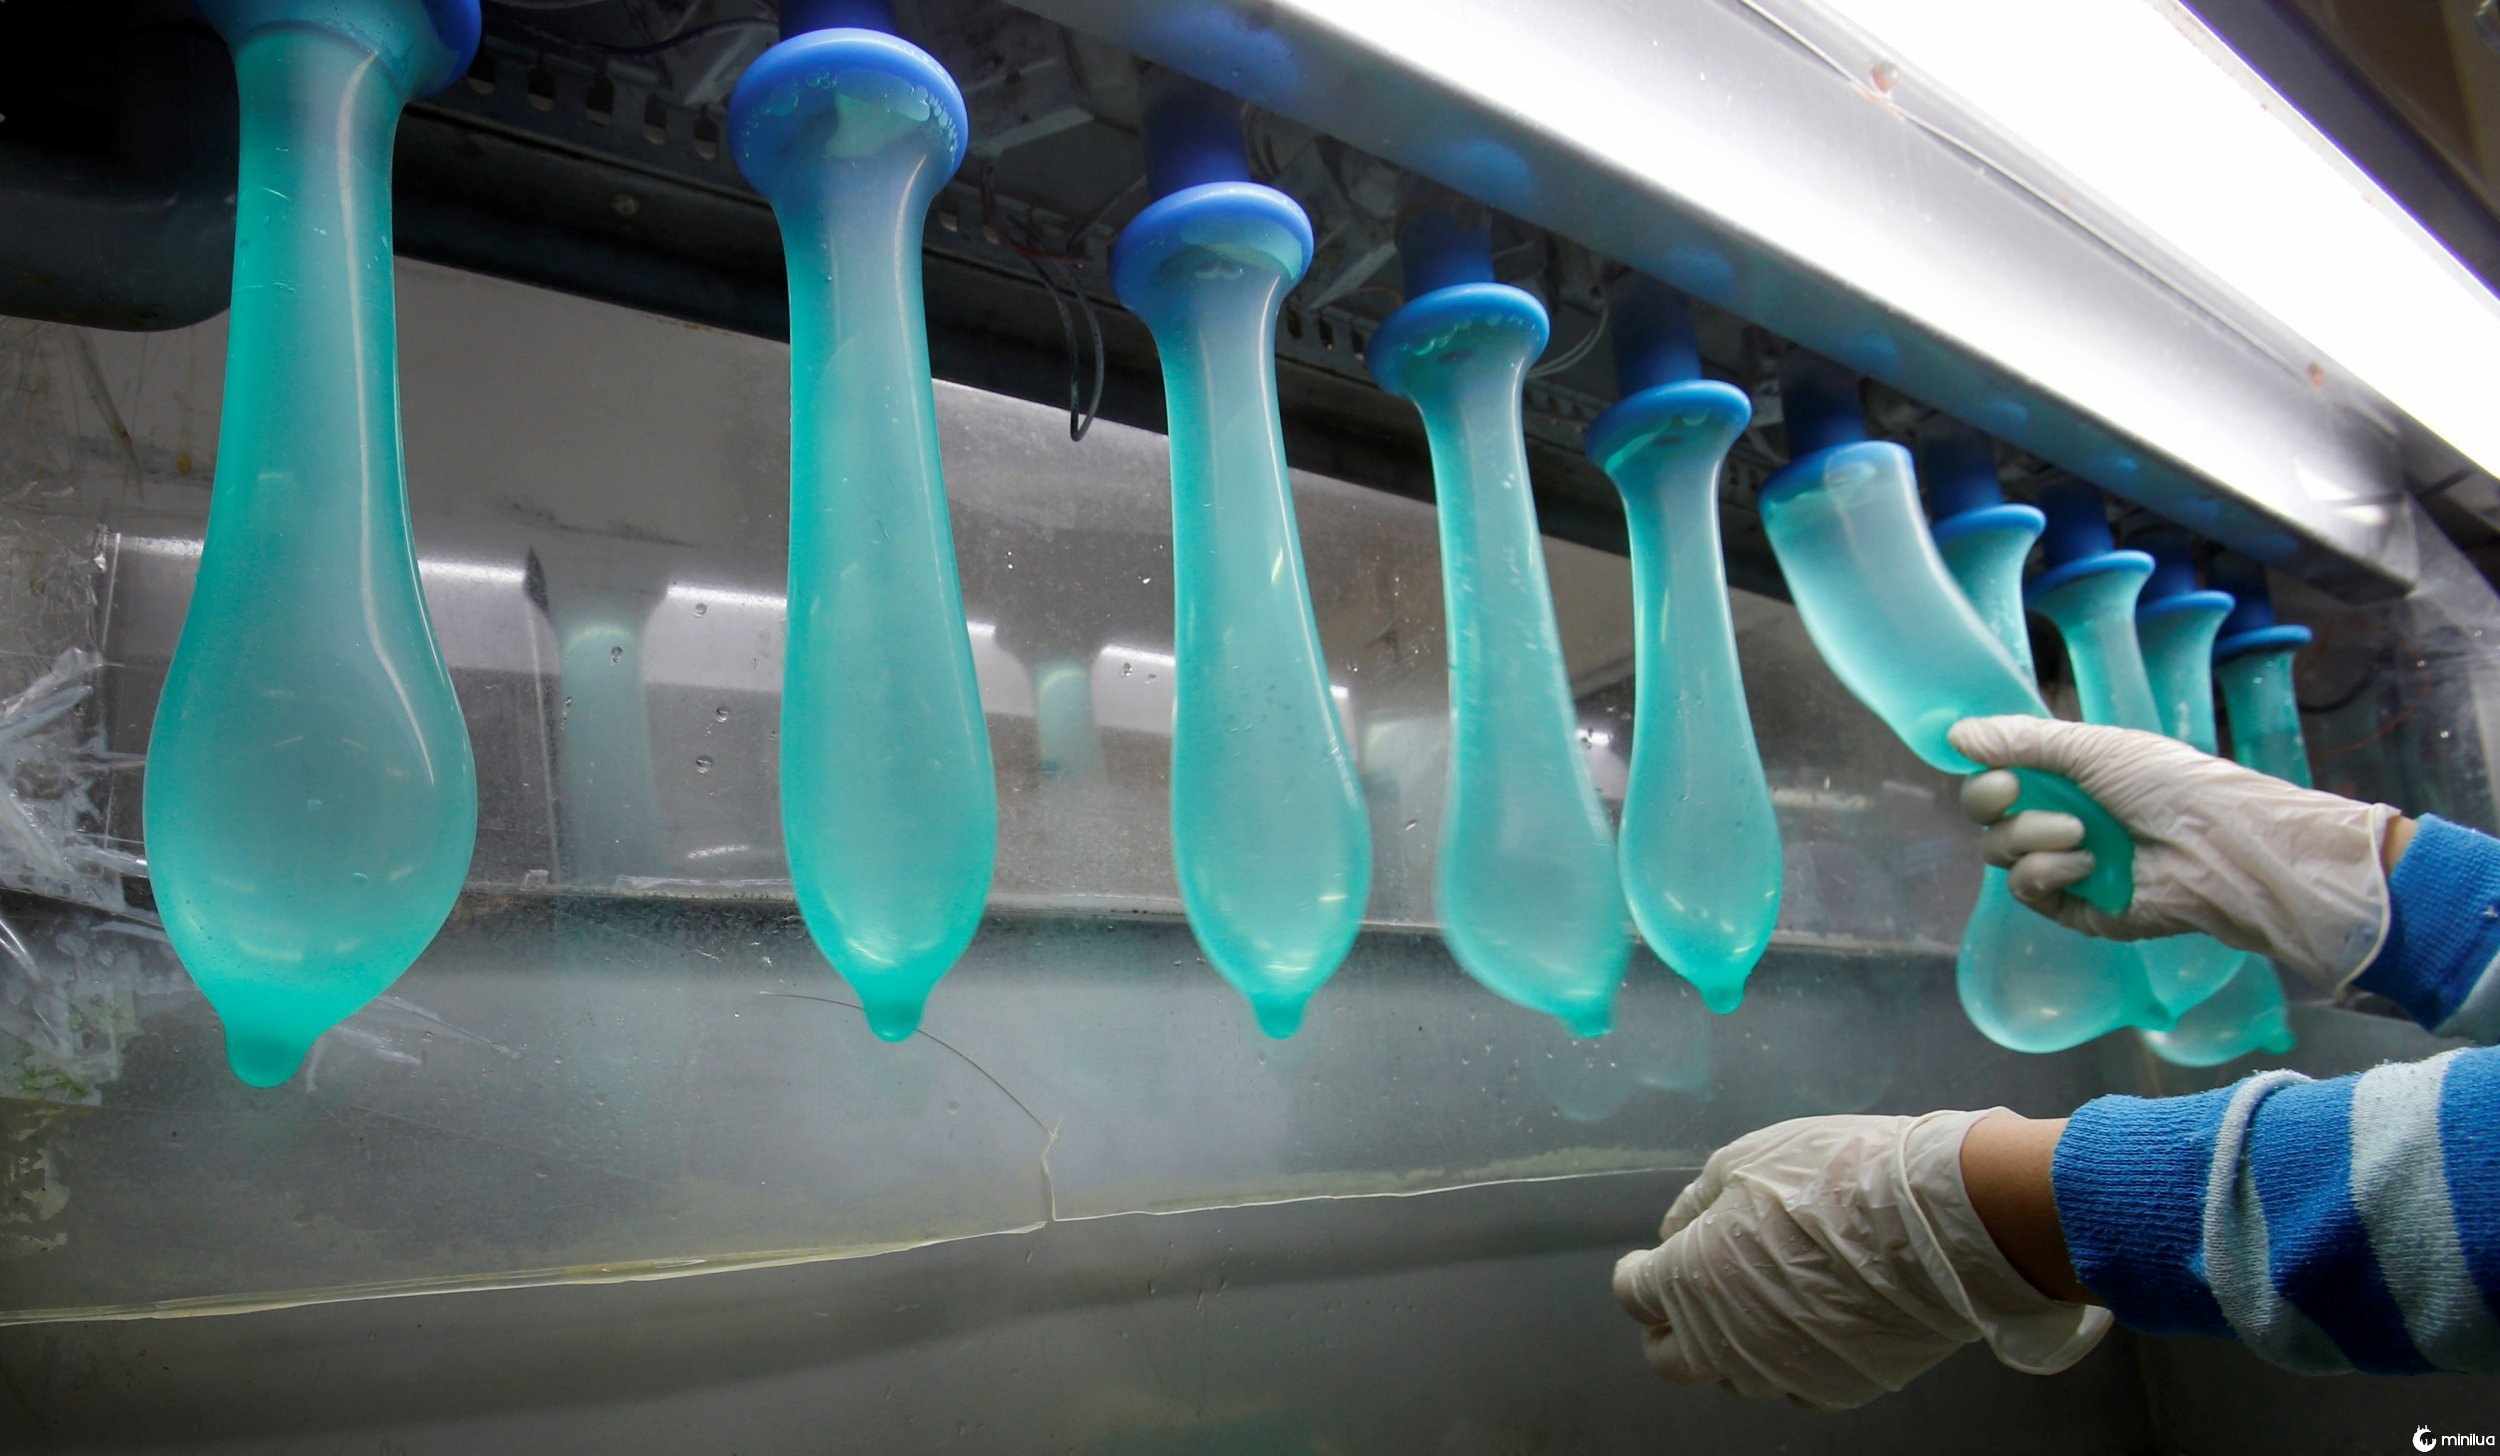 A worker performs a test on condoms at Malaysia's Karex condom factory in Pontian